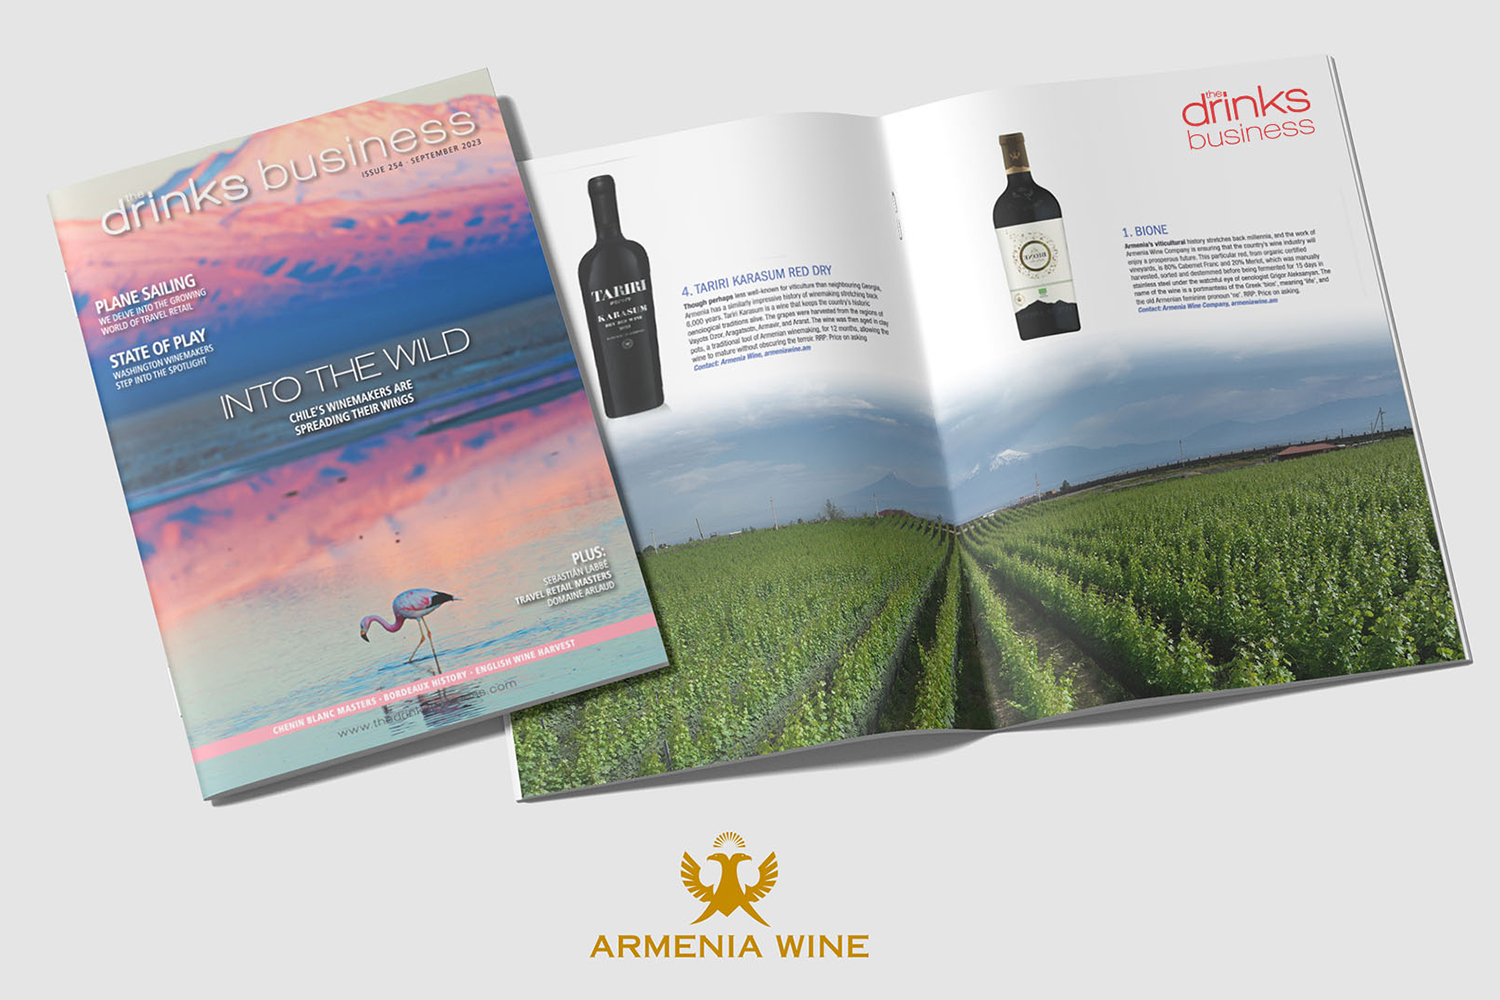 The Drink Business magazine’s reference to the Armenia Wine’s wines